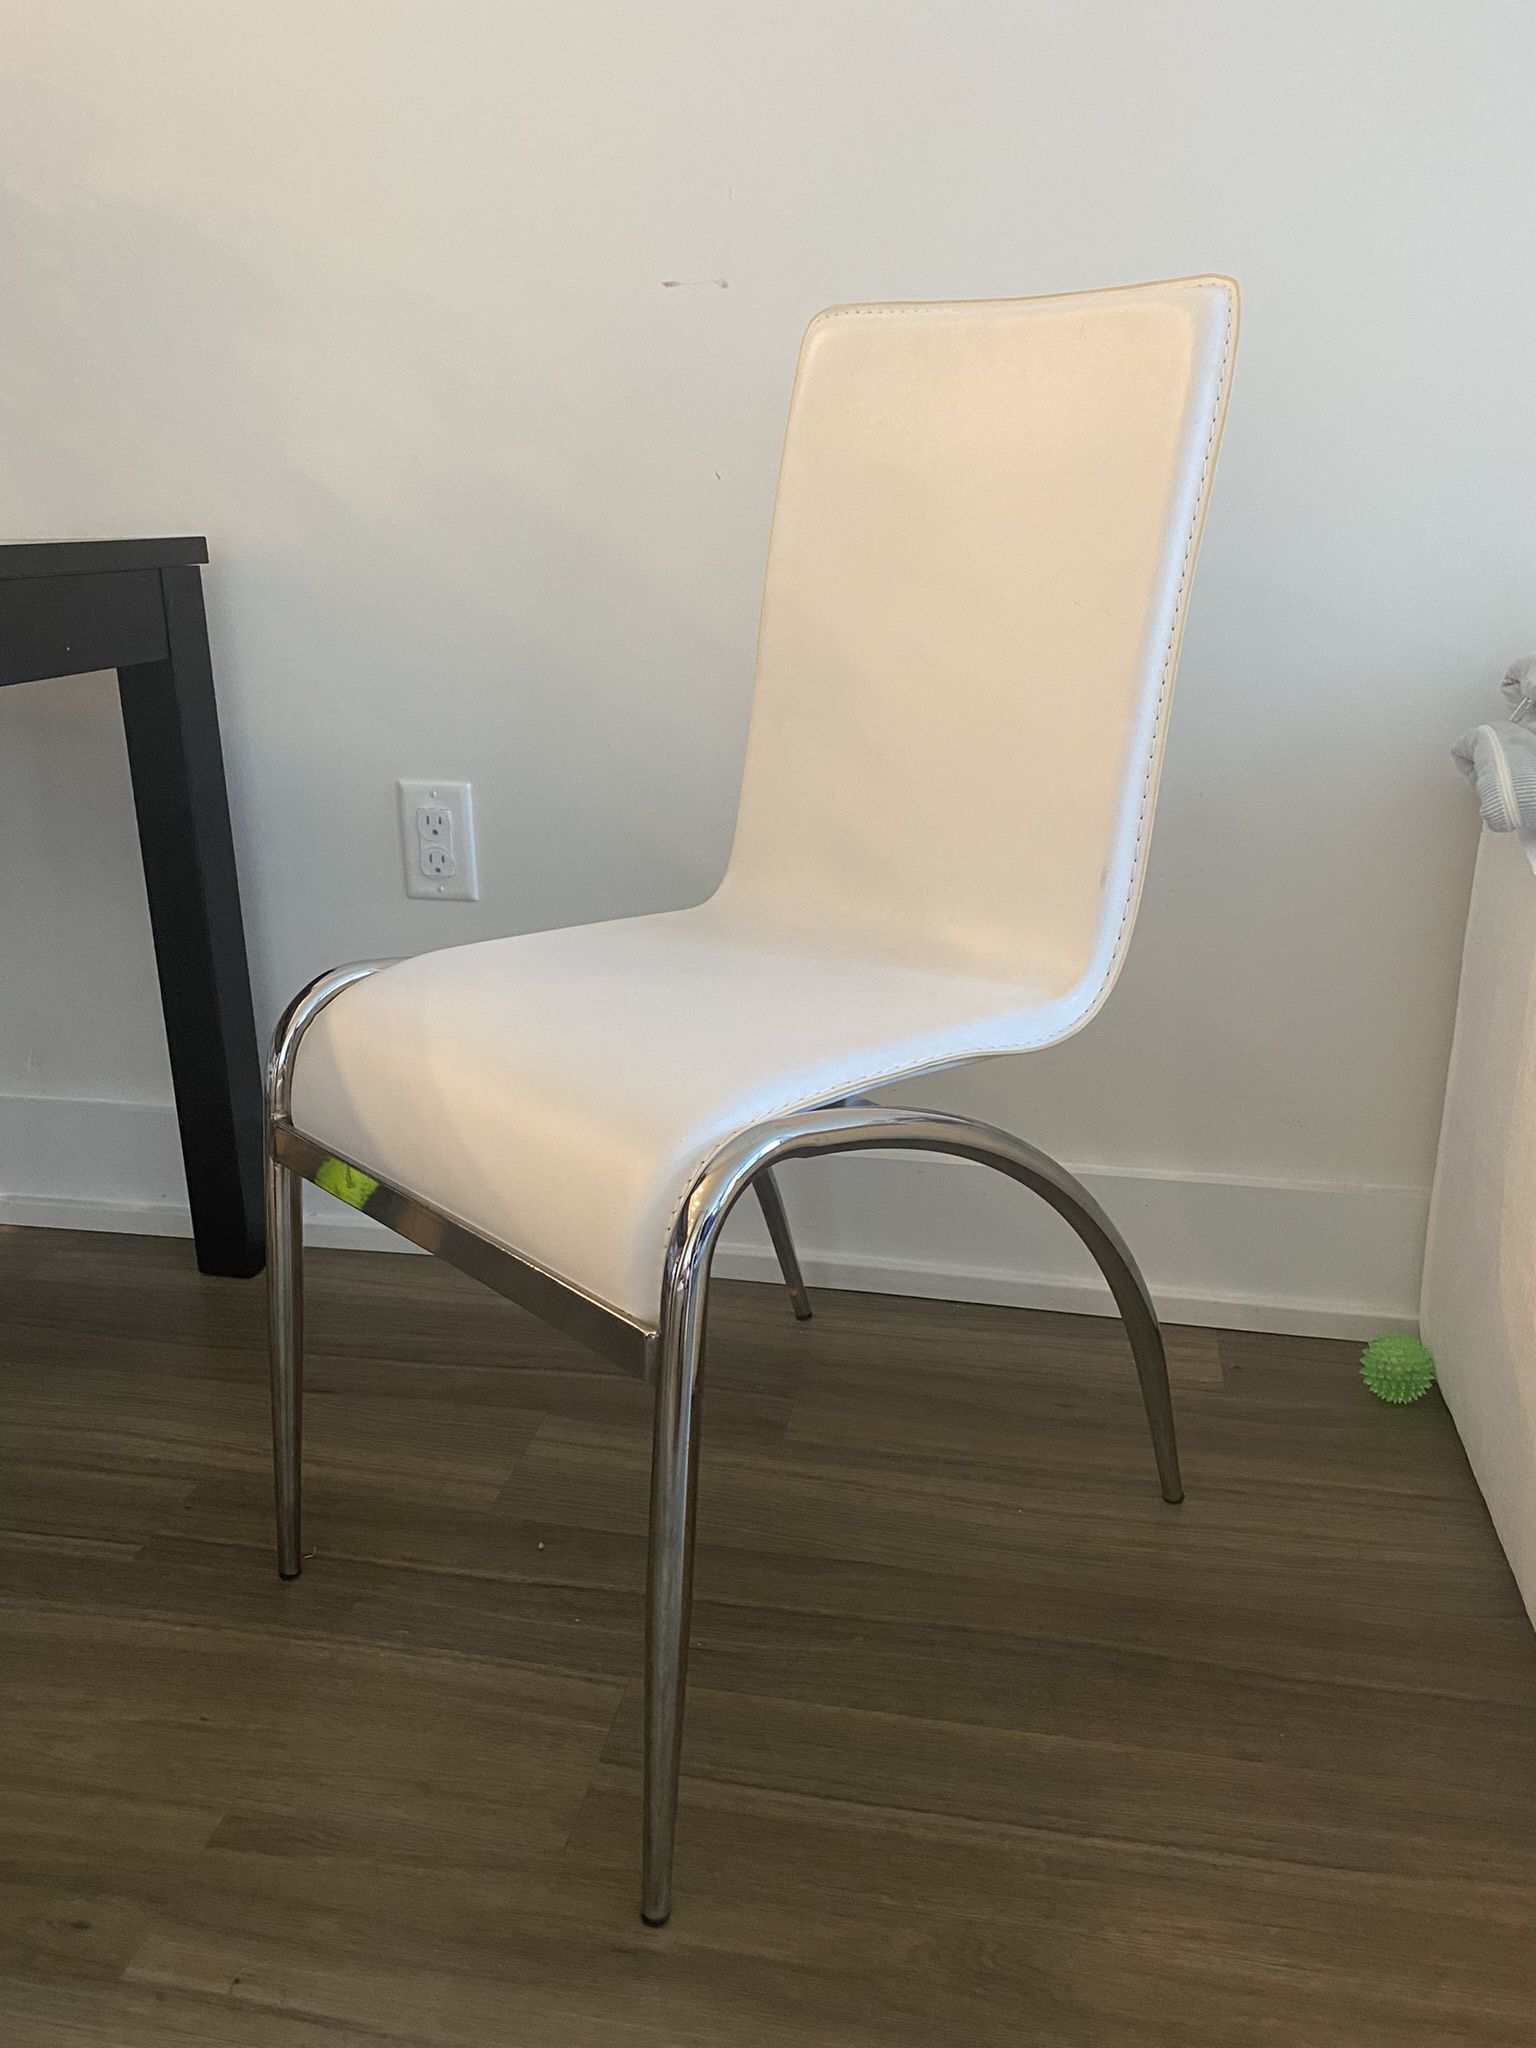 White Faux Leather  Dining Chairs Set Of (4-6) (Price Can Be Discussed)